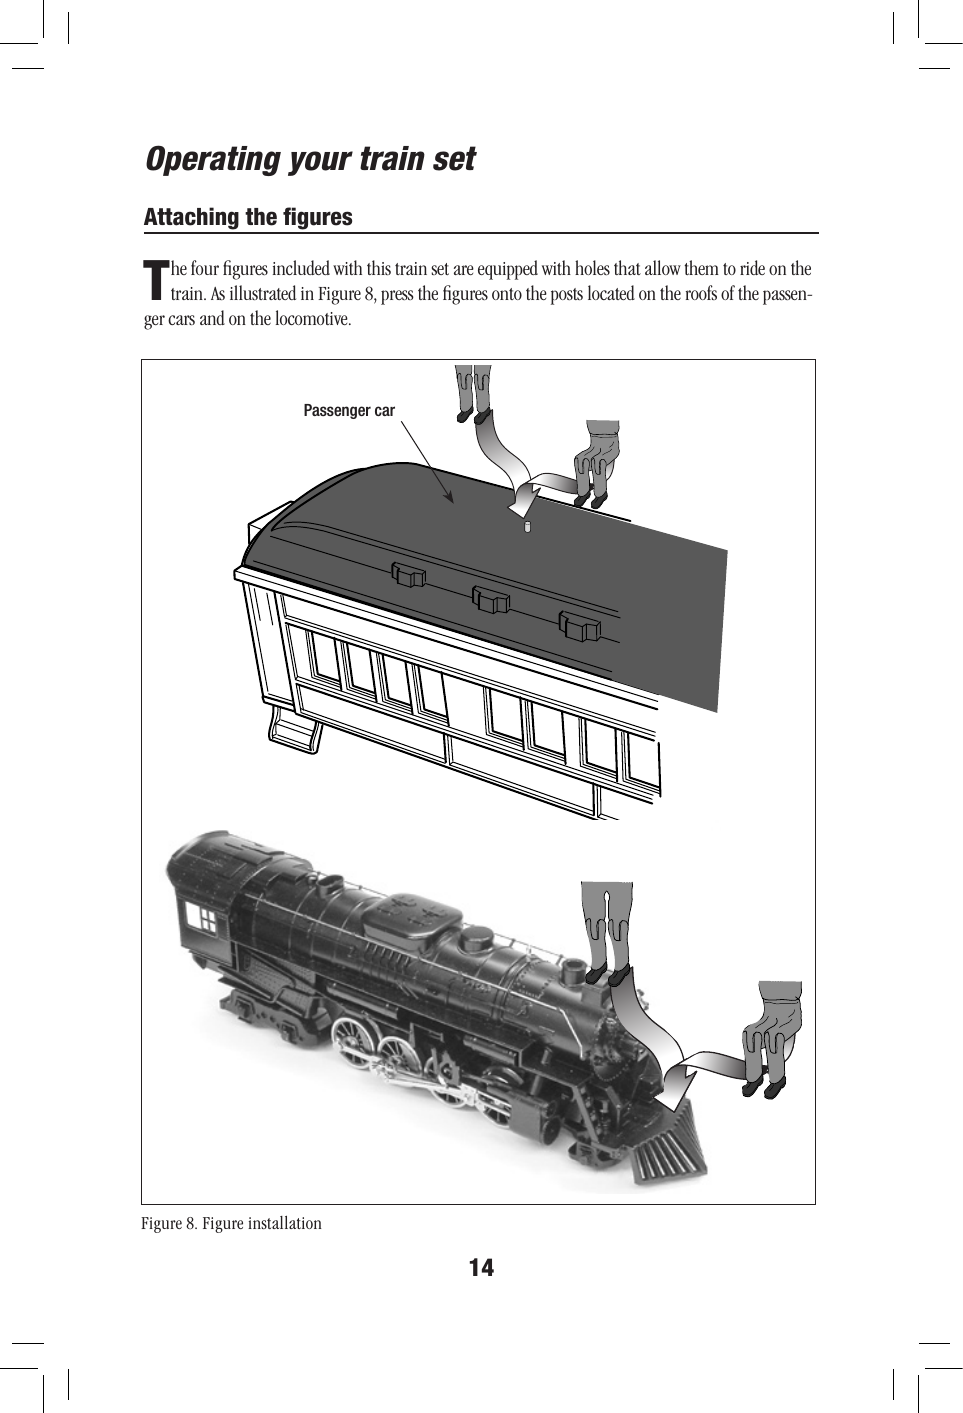 14Attaching the ﬁguresThe four ﬁgures included with this train set are equipped with holes that allow them to ride on the train. As illustrated in Figure 8, press the ﬁgures onto the posts located on the roofs of the passen-ger cars and on the locomotive.Operating your train setFigure 8. Figure installationPassenger car